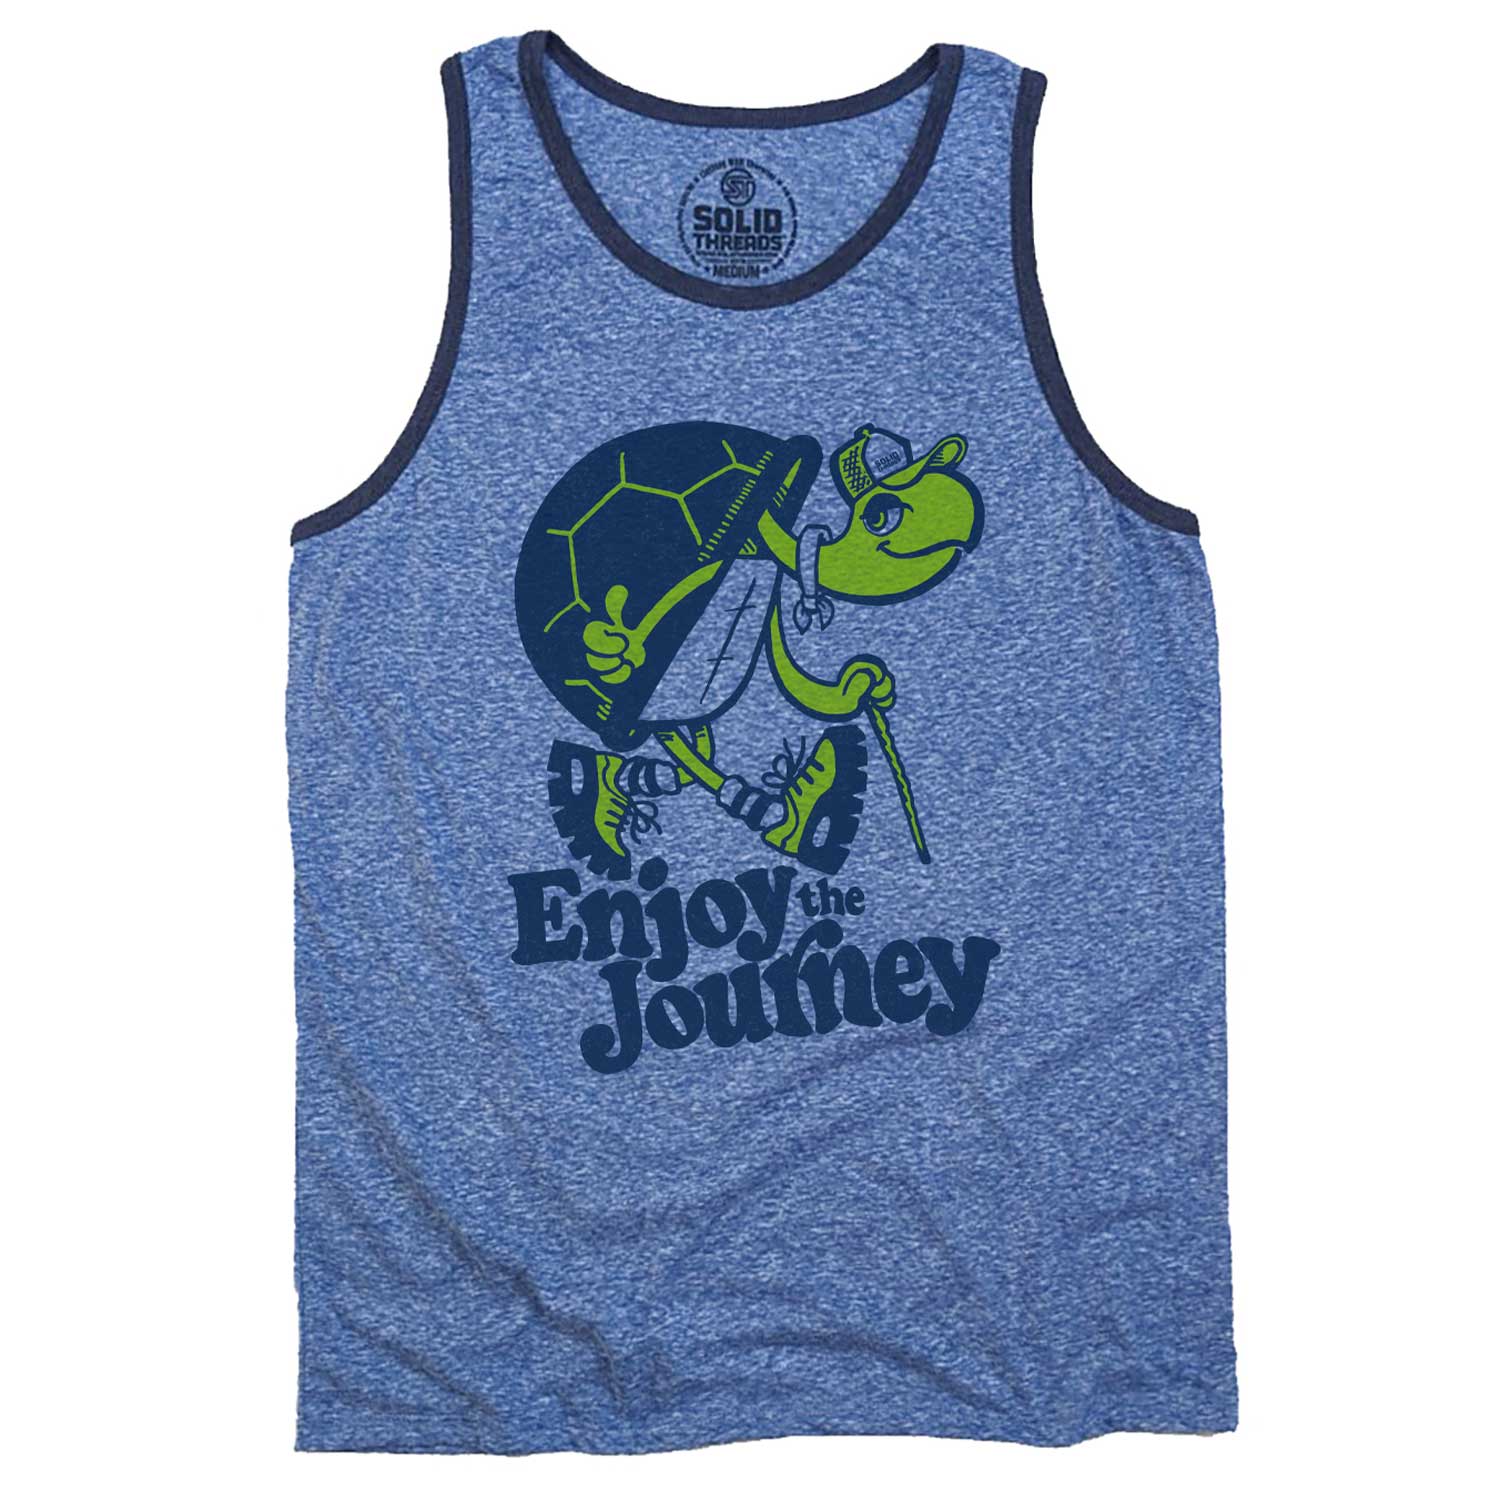 Men's Turtle Enjoy the Journey Vintage Graphic Tank Top | Funny Turtle T-shirt | Solid Threads